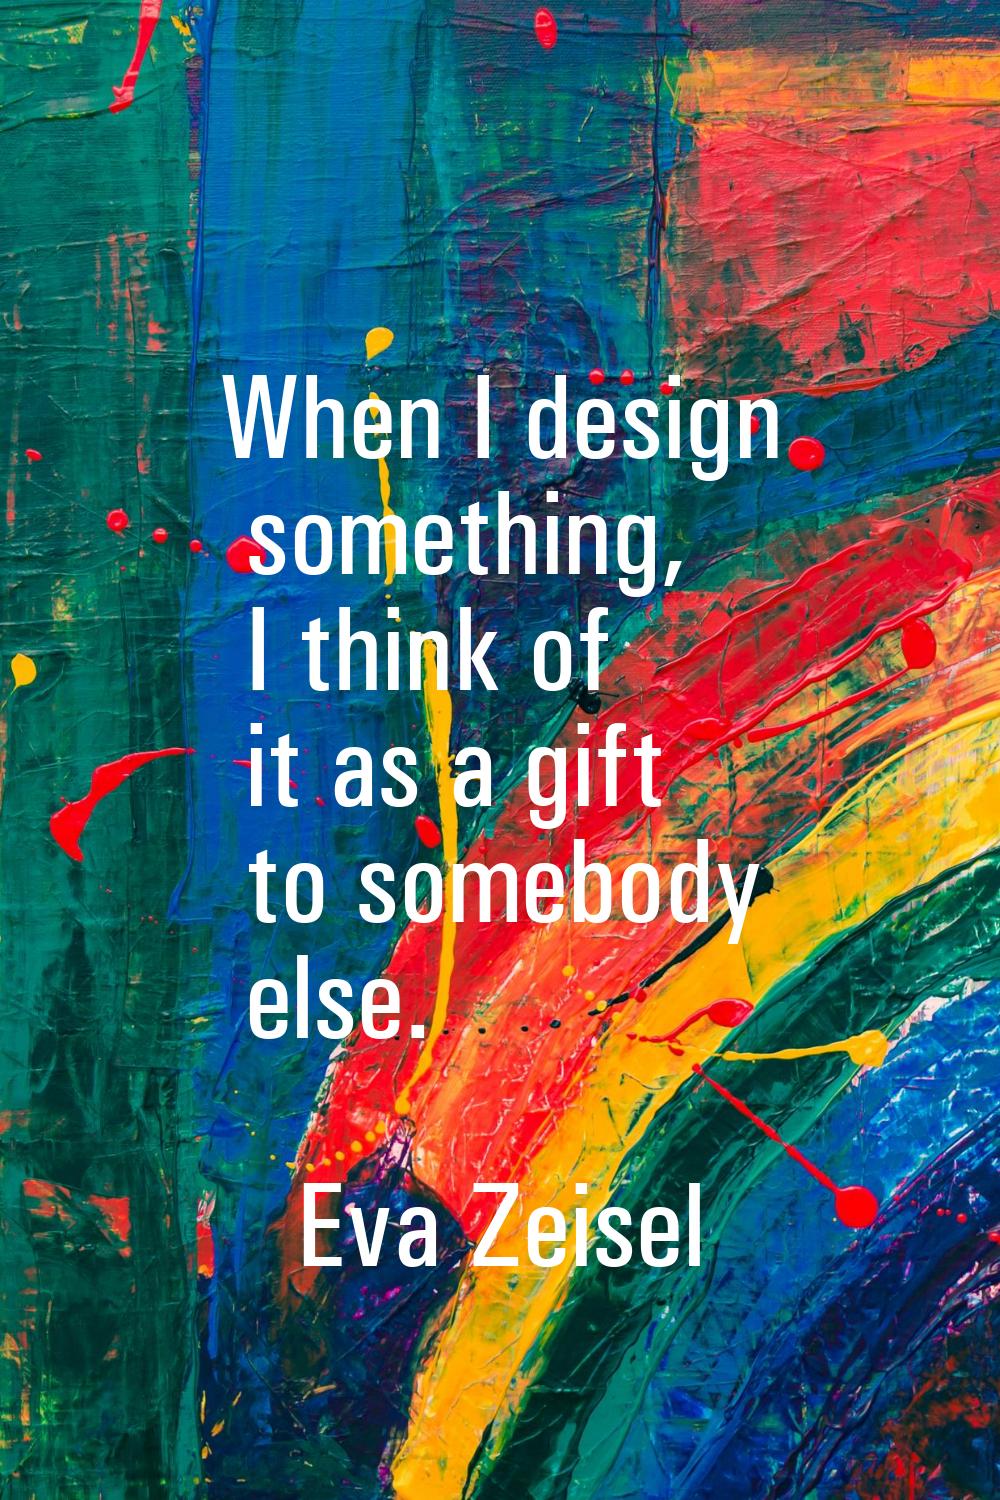 When I design something, I think of it as a gift to somebody else.